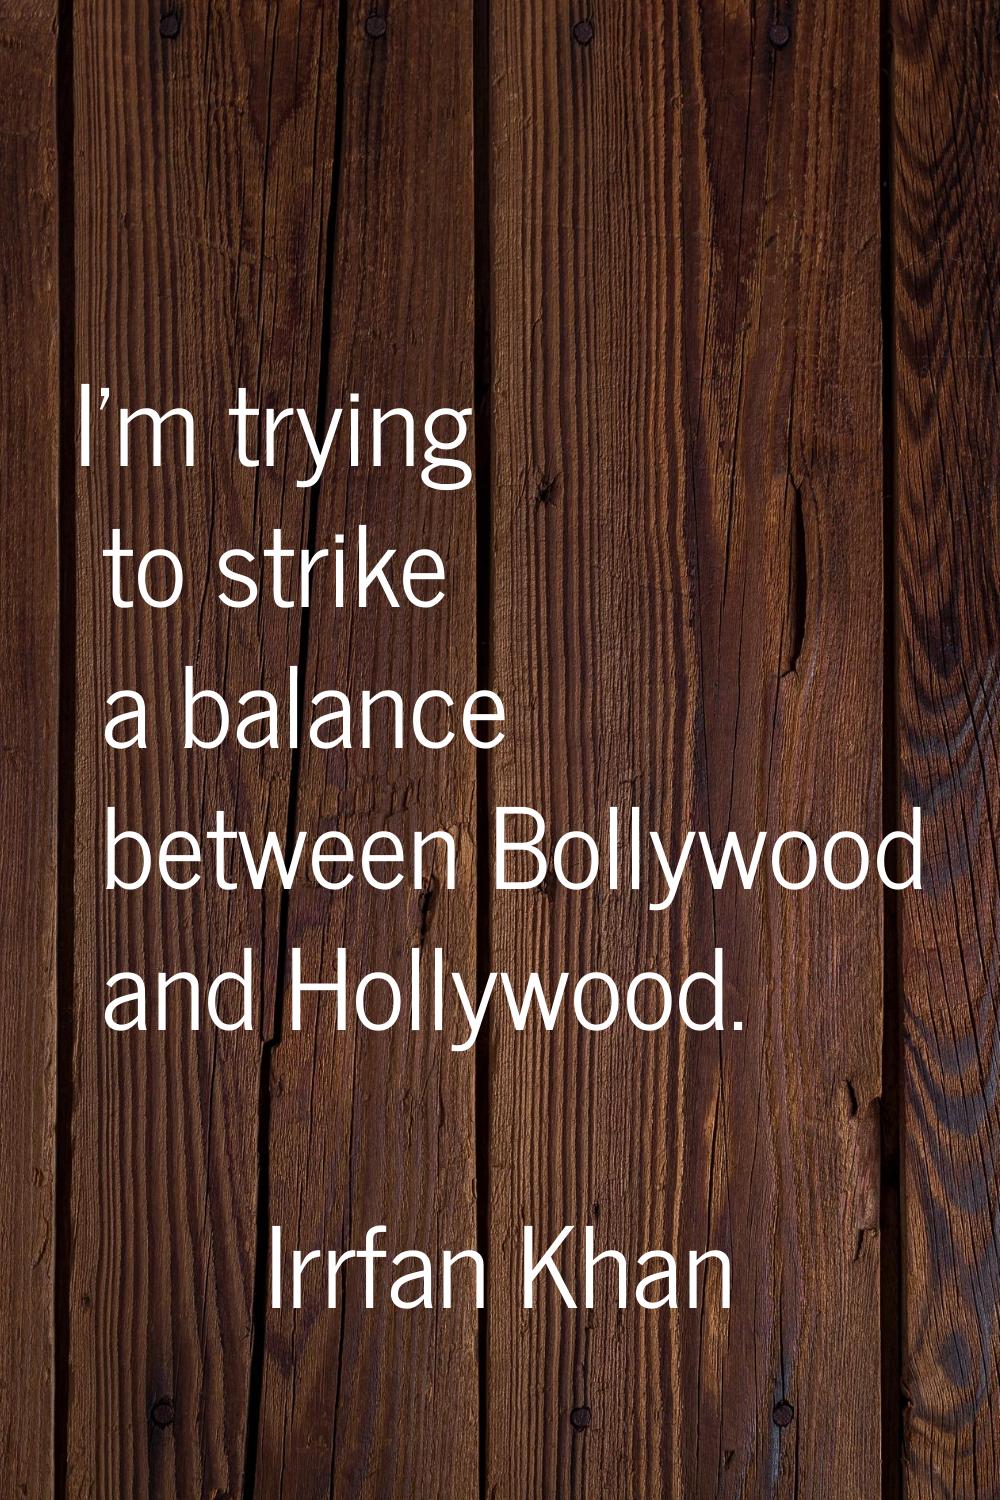 I'm trying to strike a balance between Bollywood and Hollywood.